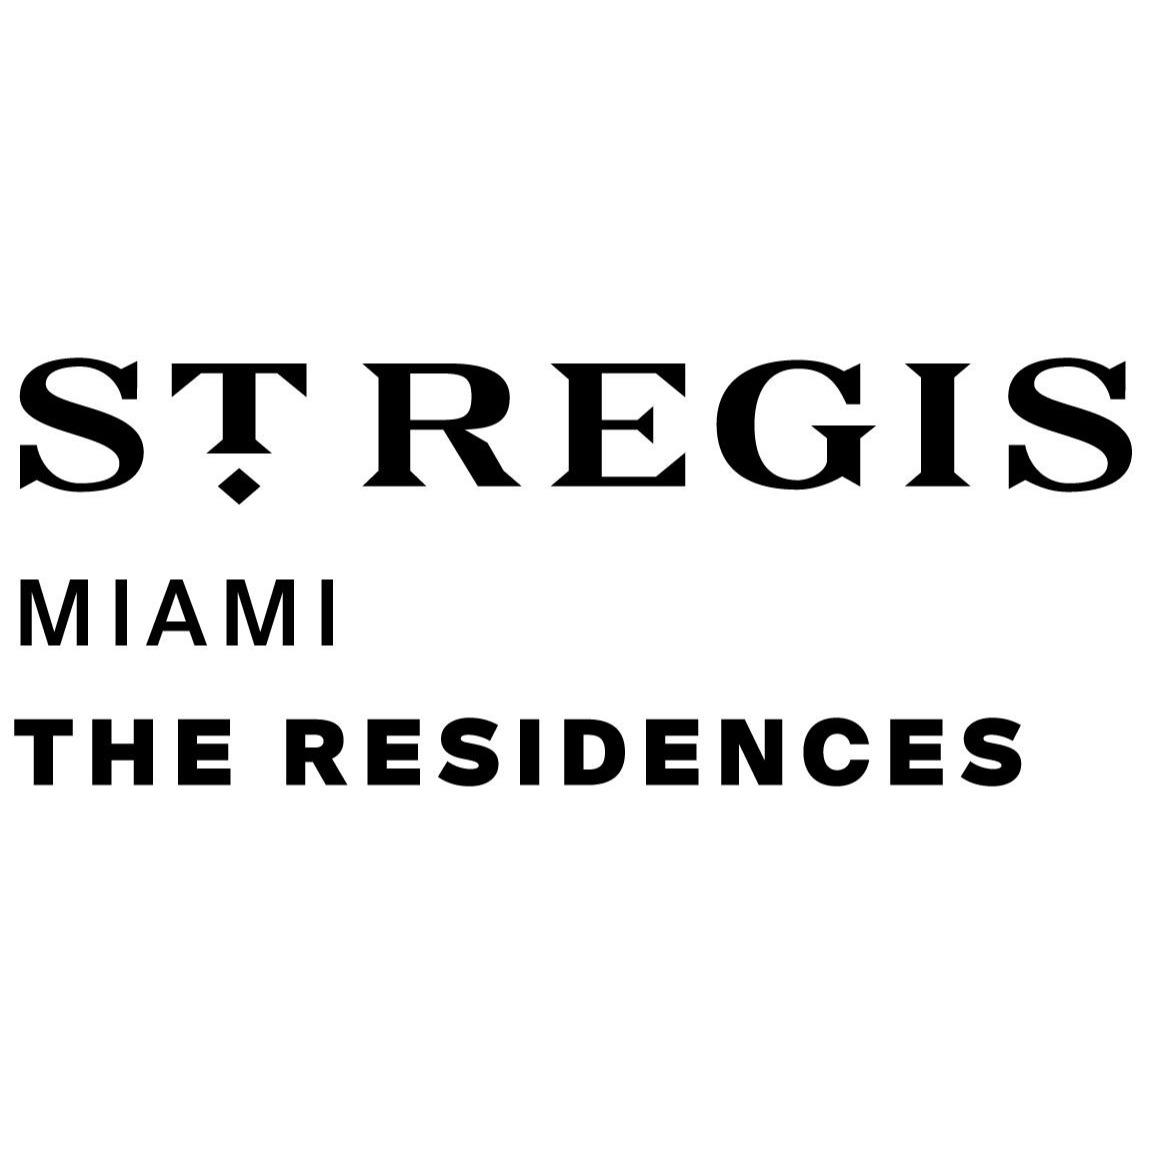 The St. Regis Residences, Miami - Official Sales Gallery - Miami, FL 33131 - (786)713-3562 | ShowMeLocal.com